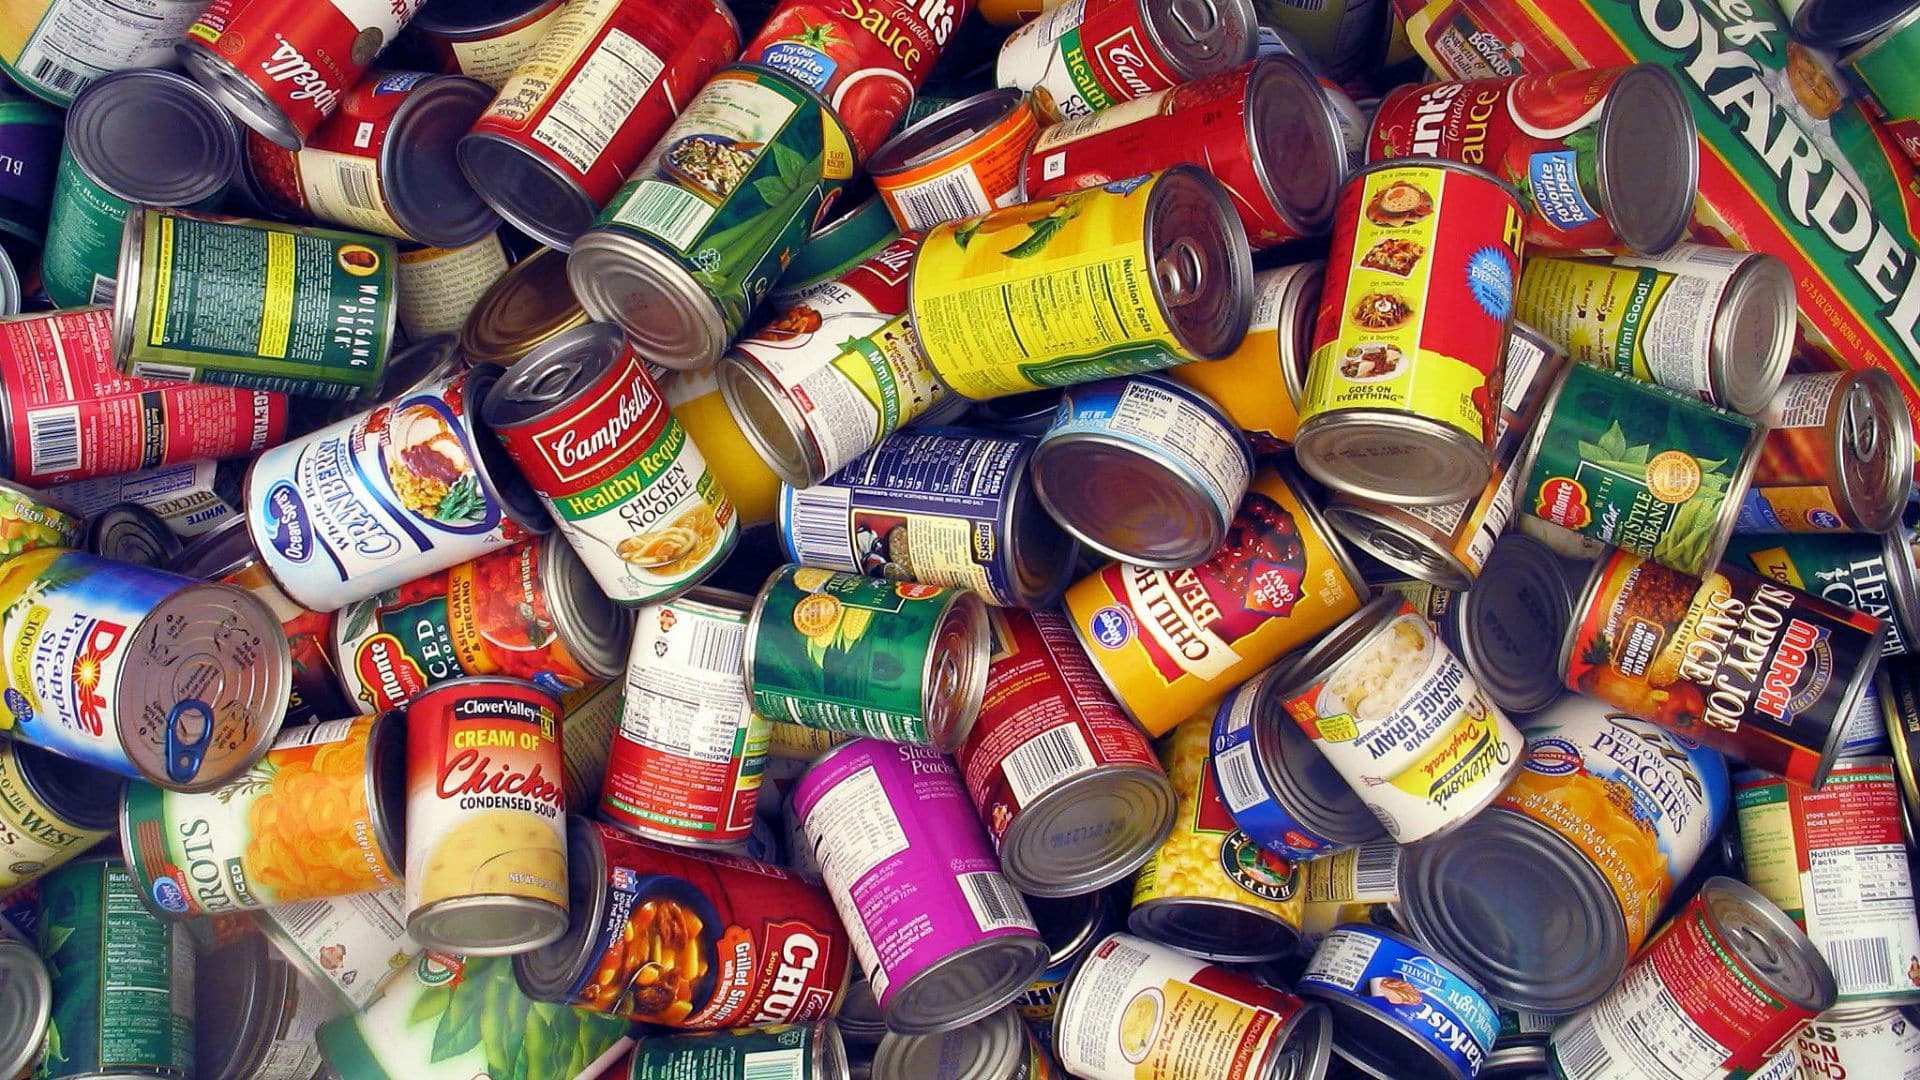 THREE RIGHT WAYS TO PRESERVE CANNED FOOD